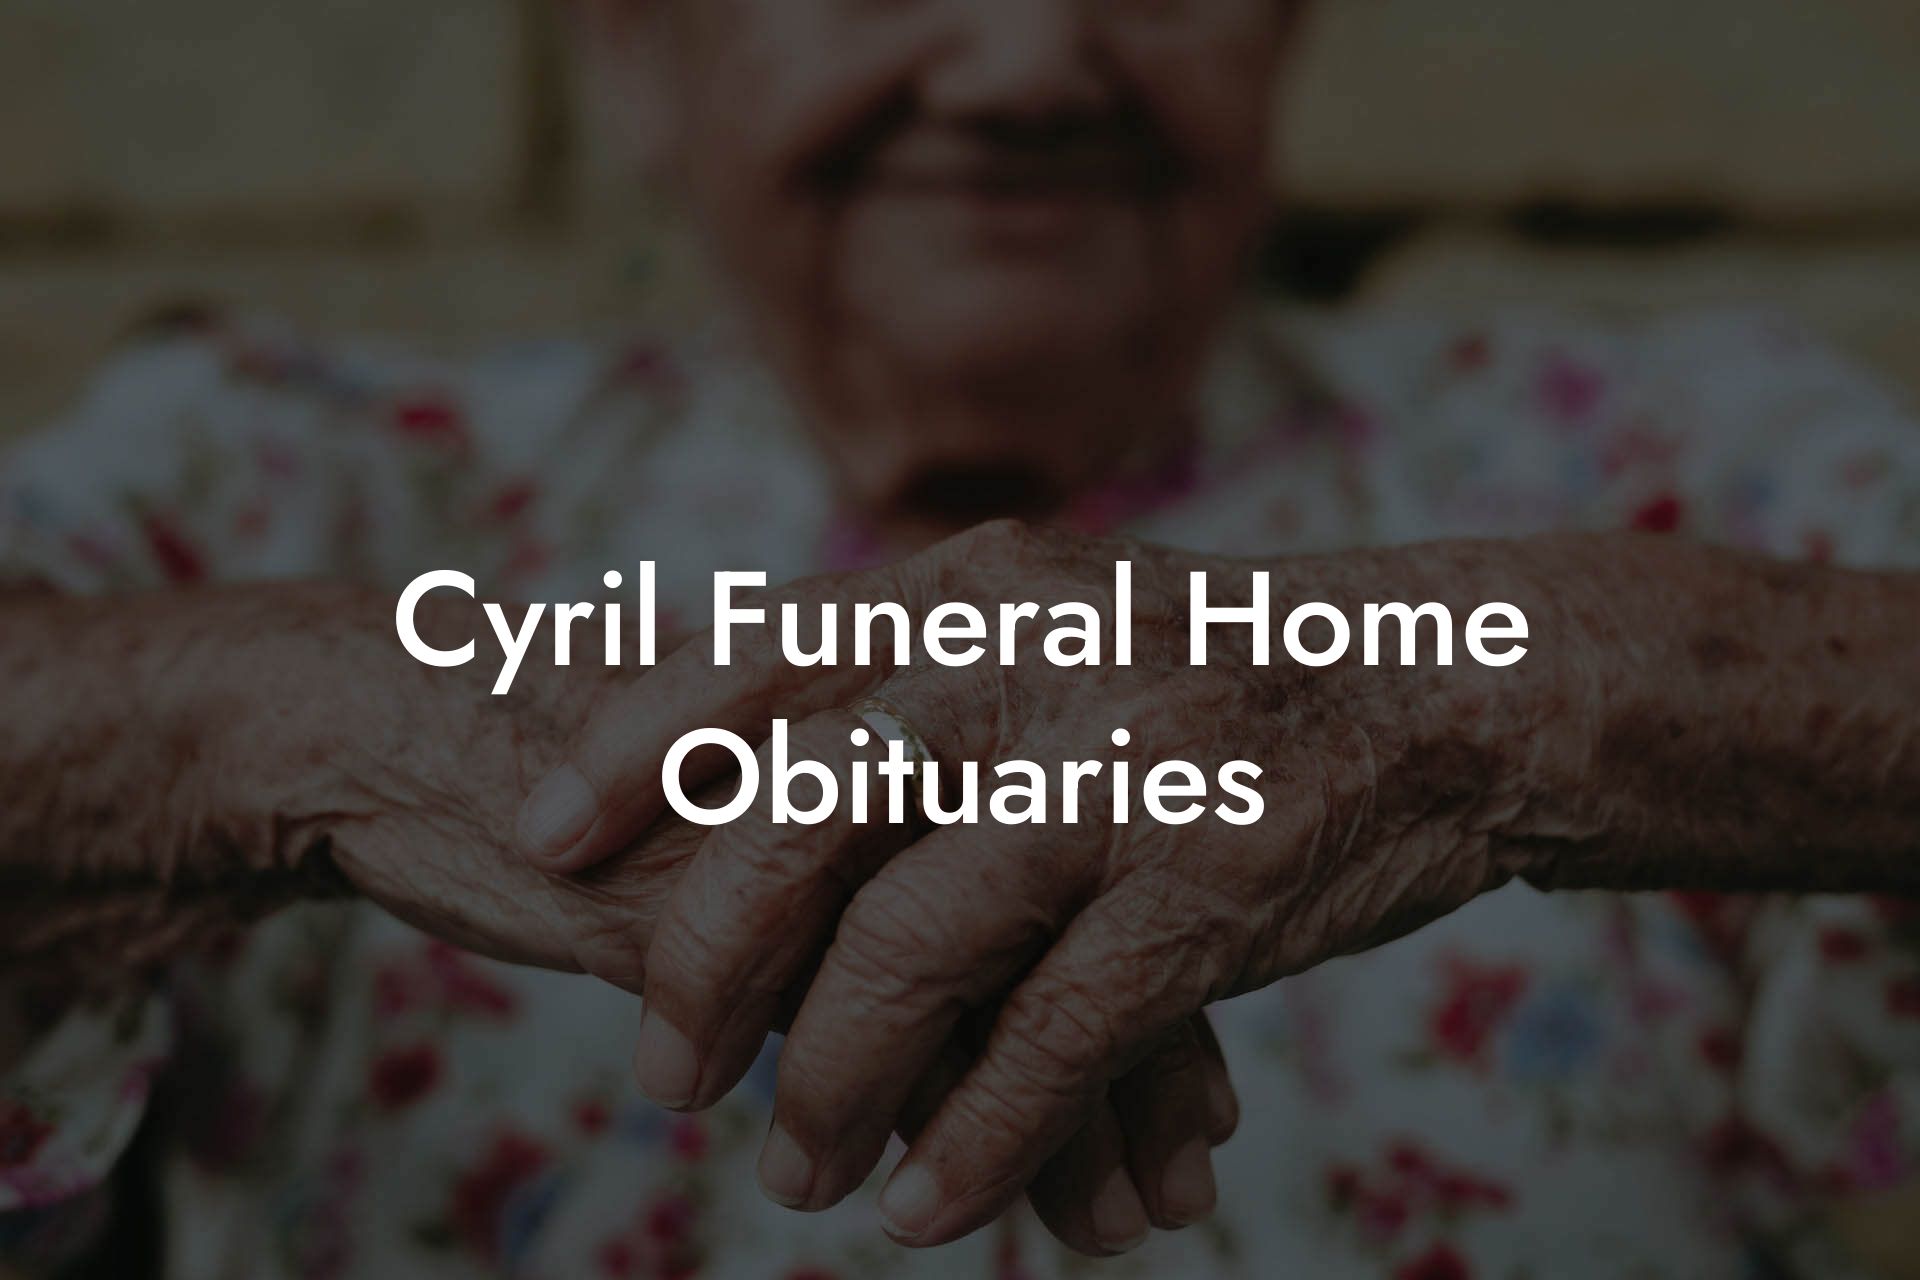 Cyril Funeral Home Obituaries